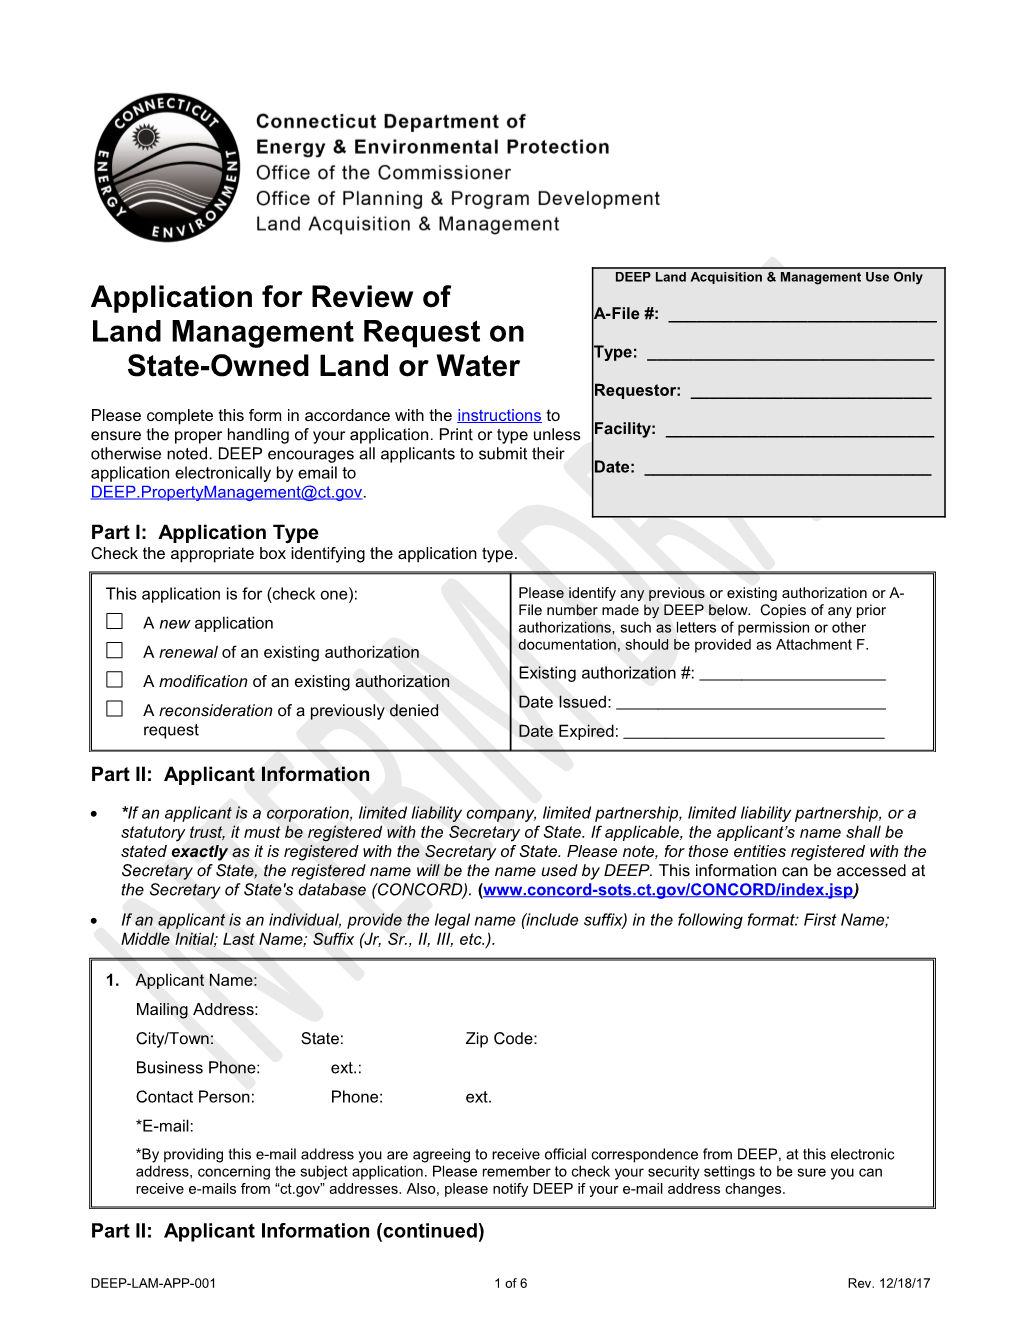 Application for Review of Land Management Request on State-Owned Land Or Water